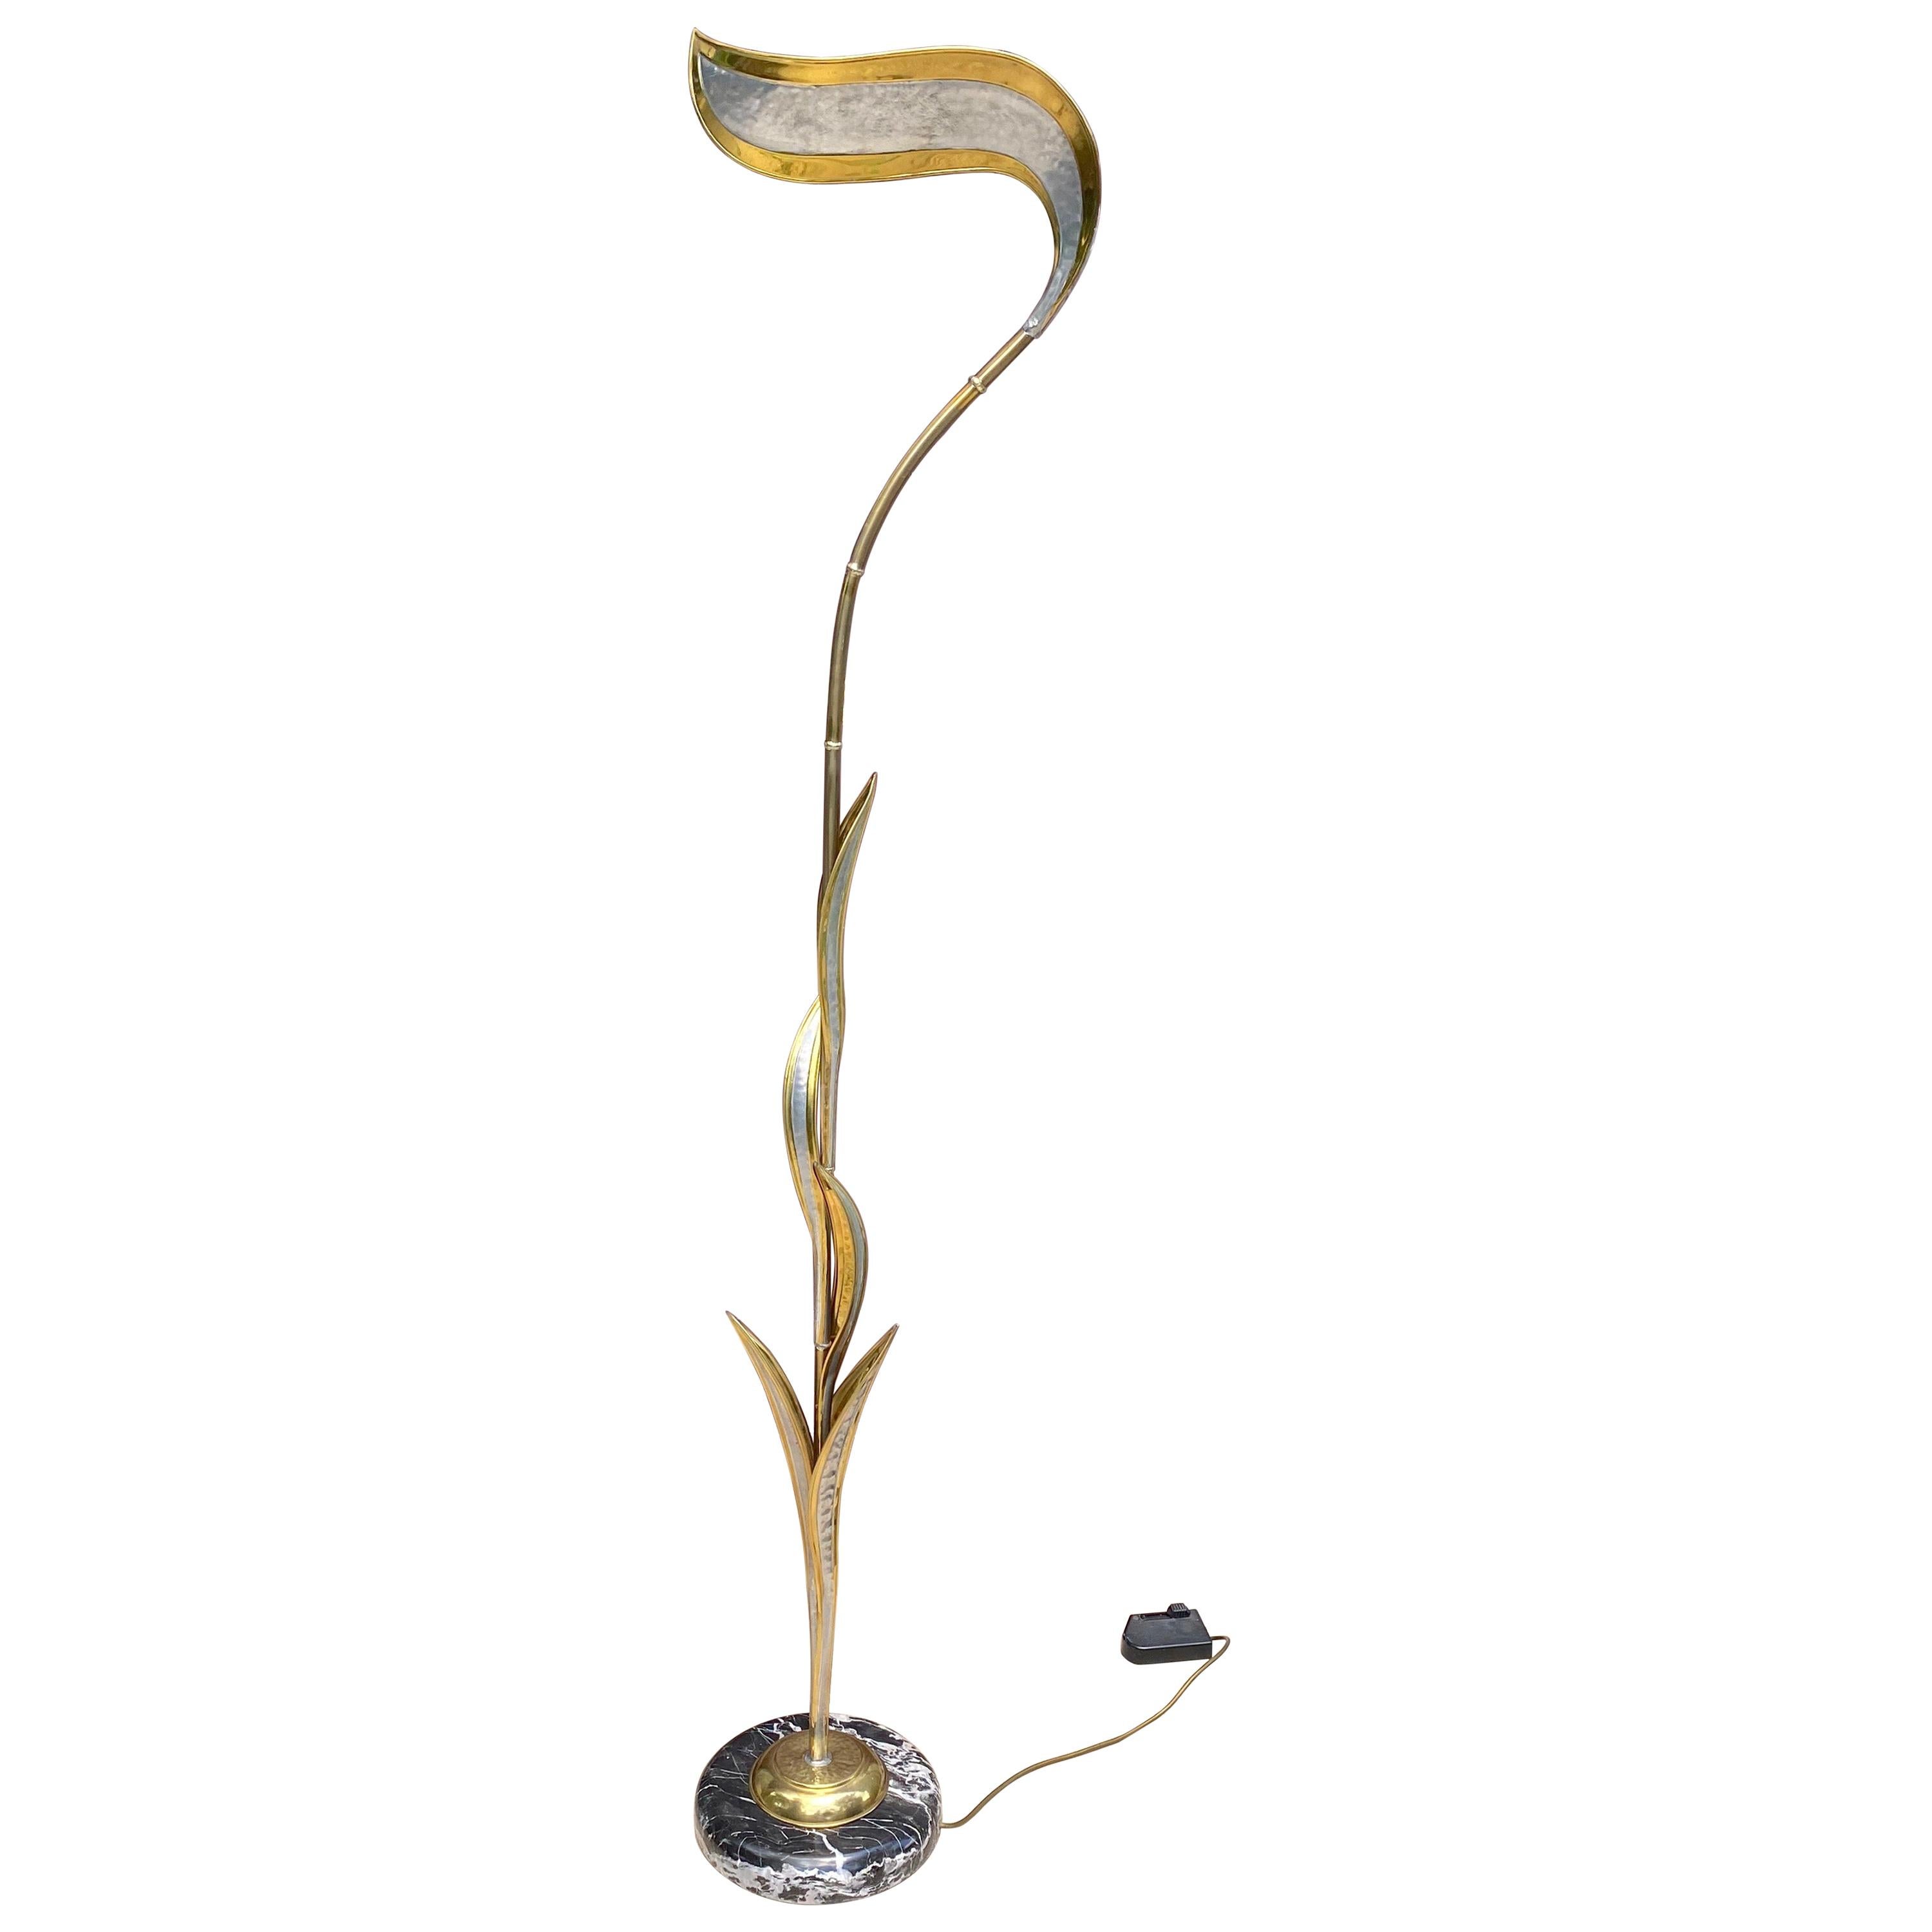 Isabelle & Richard Faure and Foliage Brass and Marble Floor Lamp France, 1970s For Sale